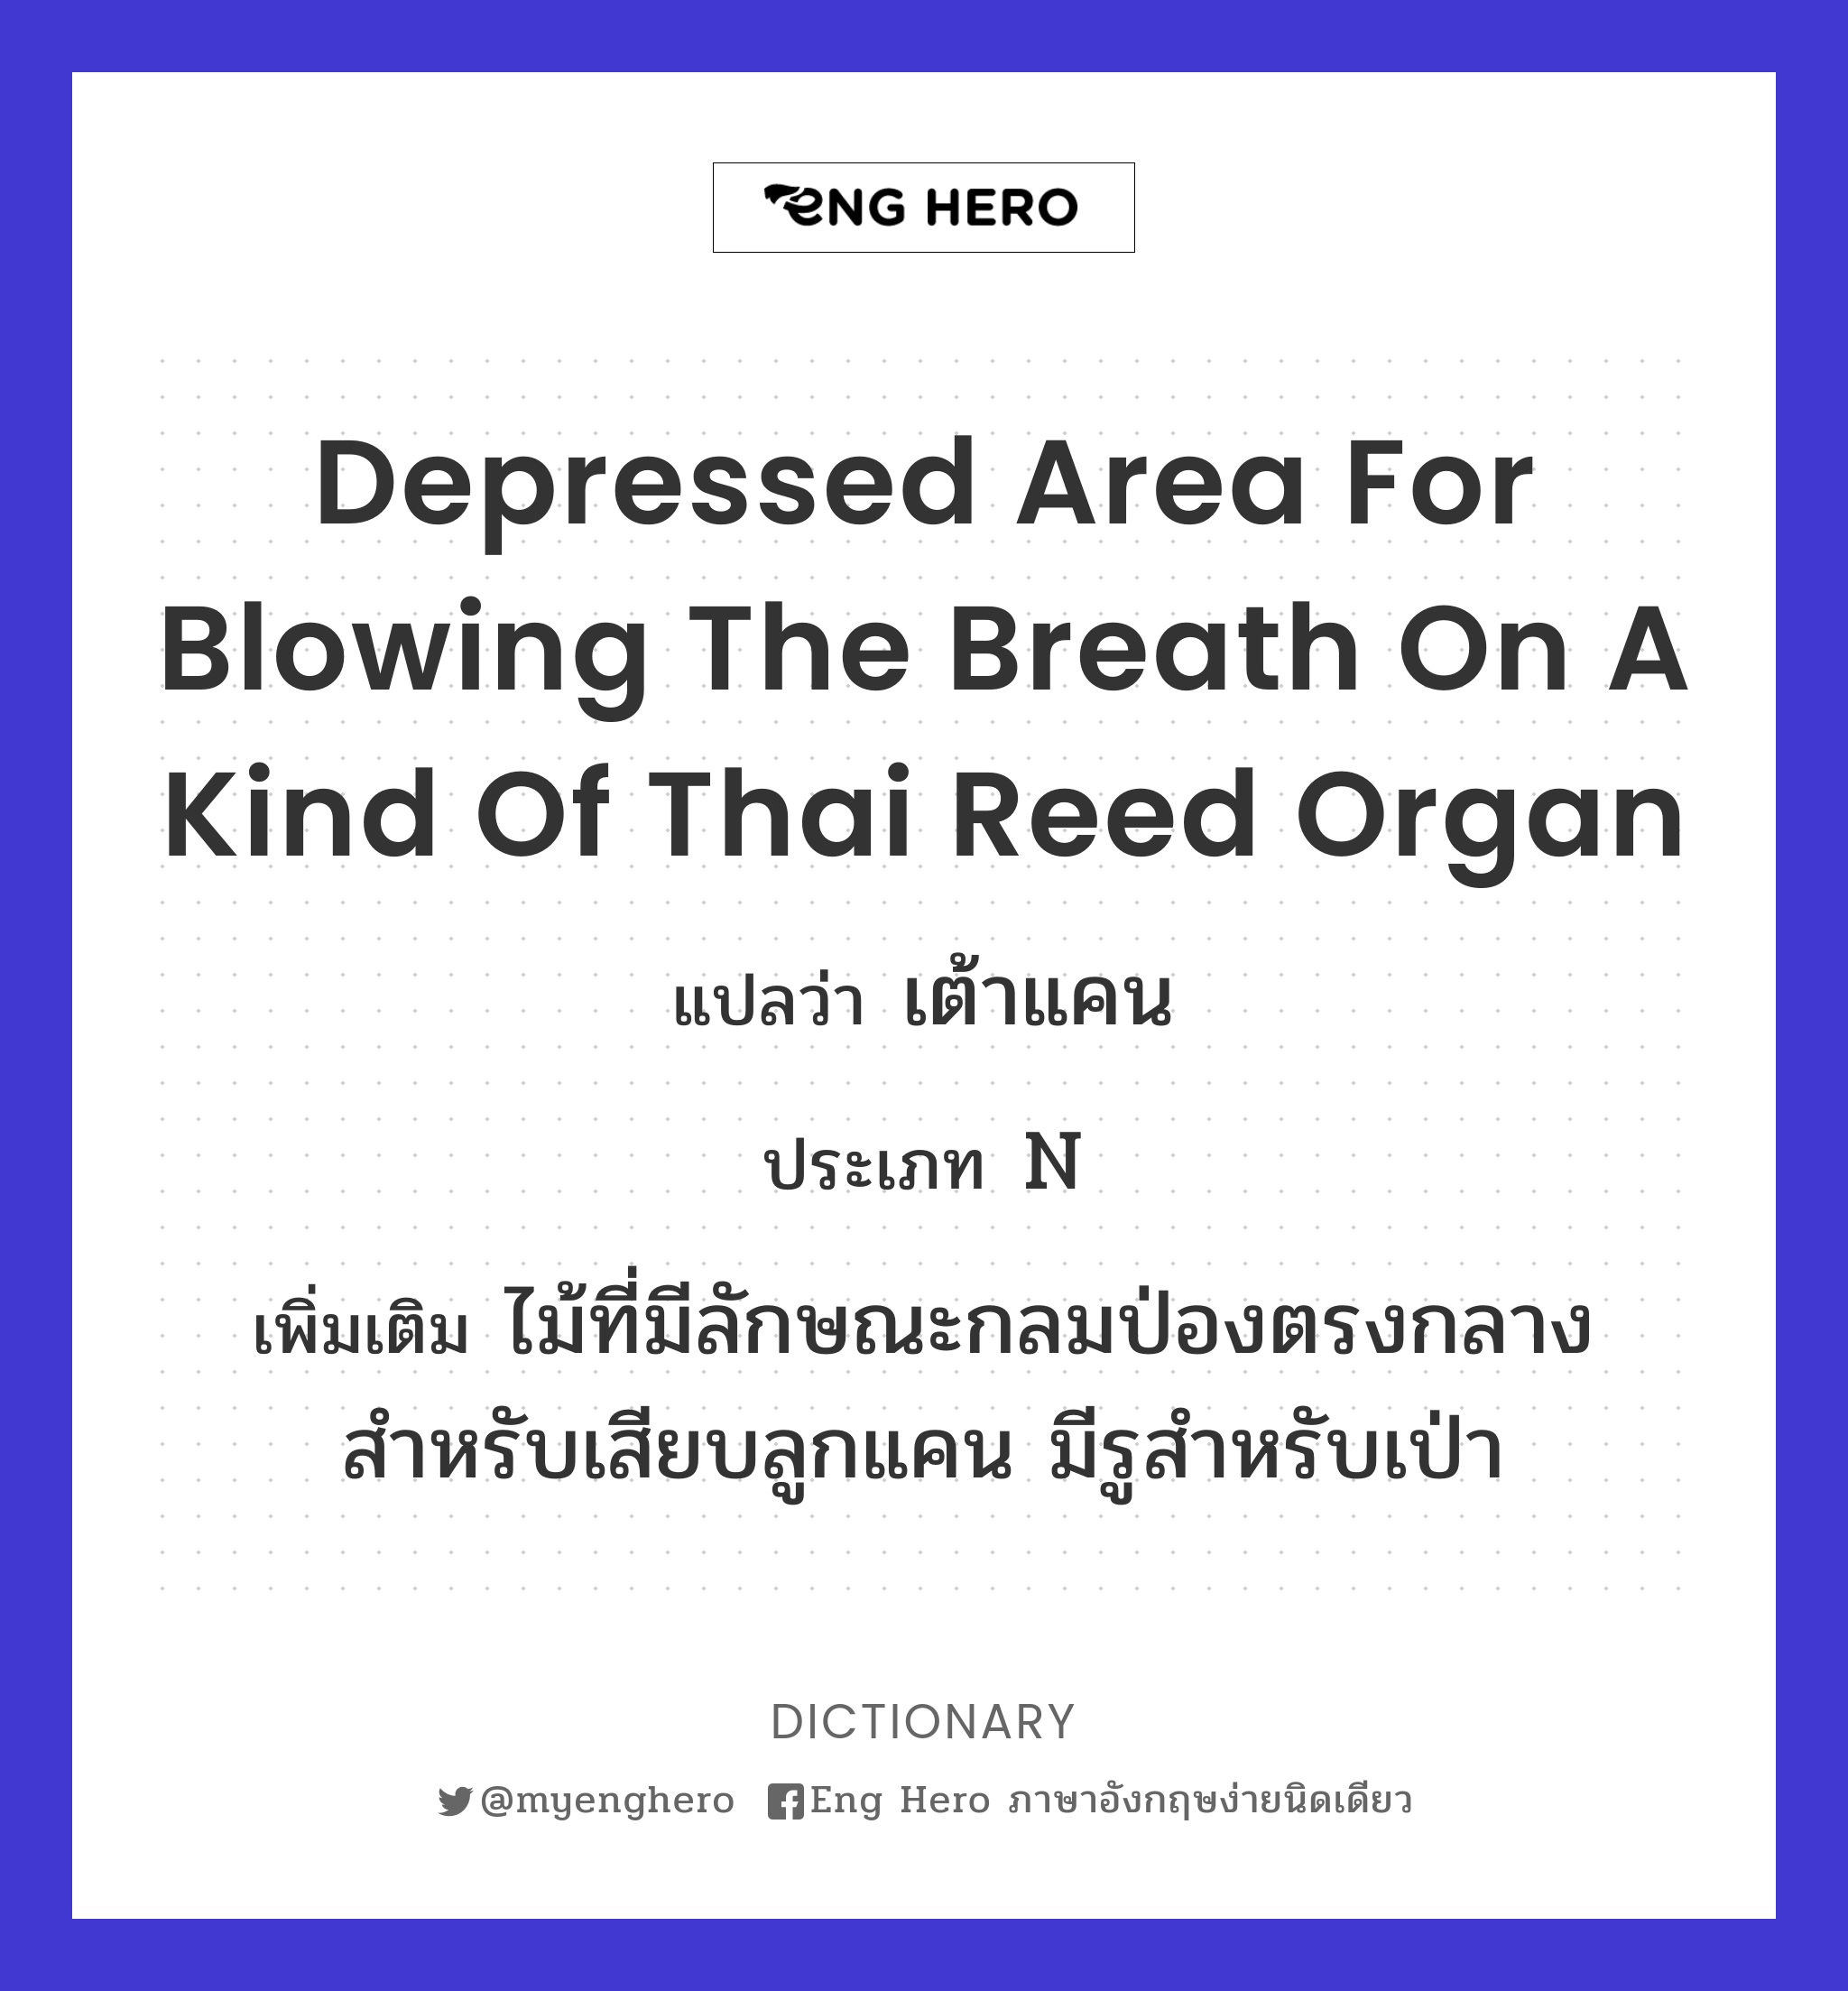 depressed area for blowing the breath on a kind of Thai reed organ